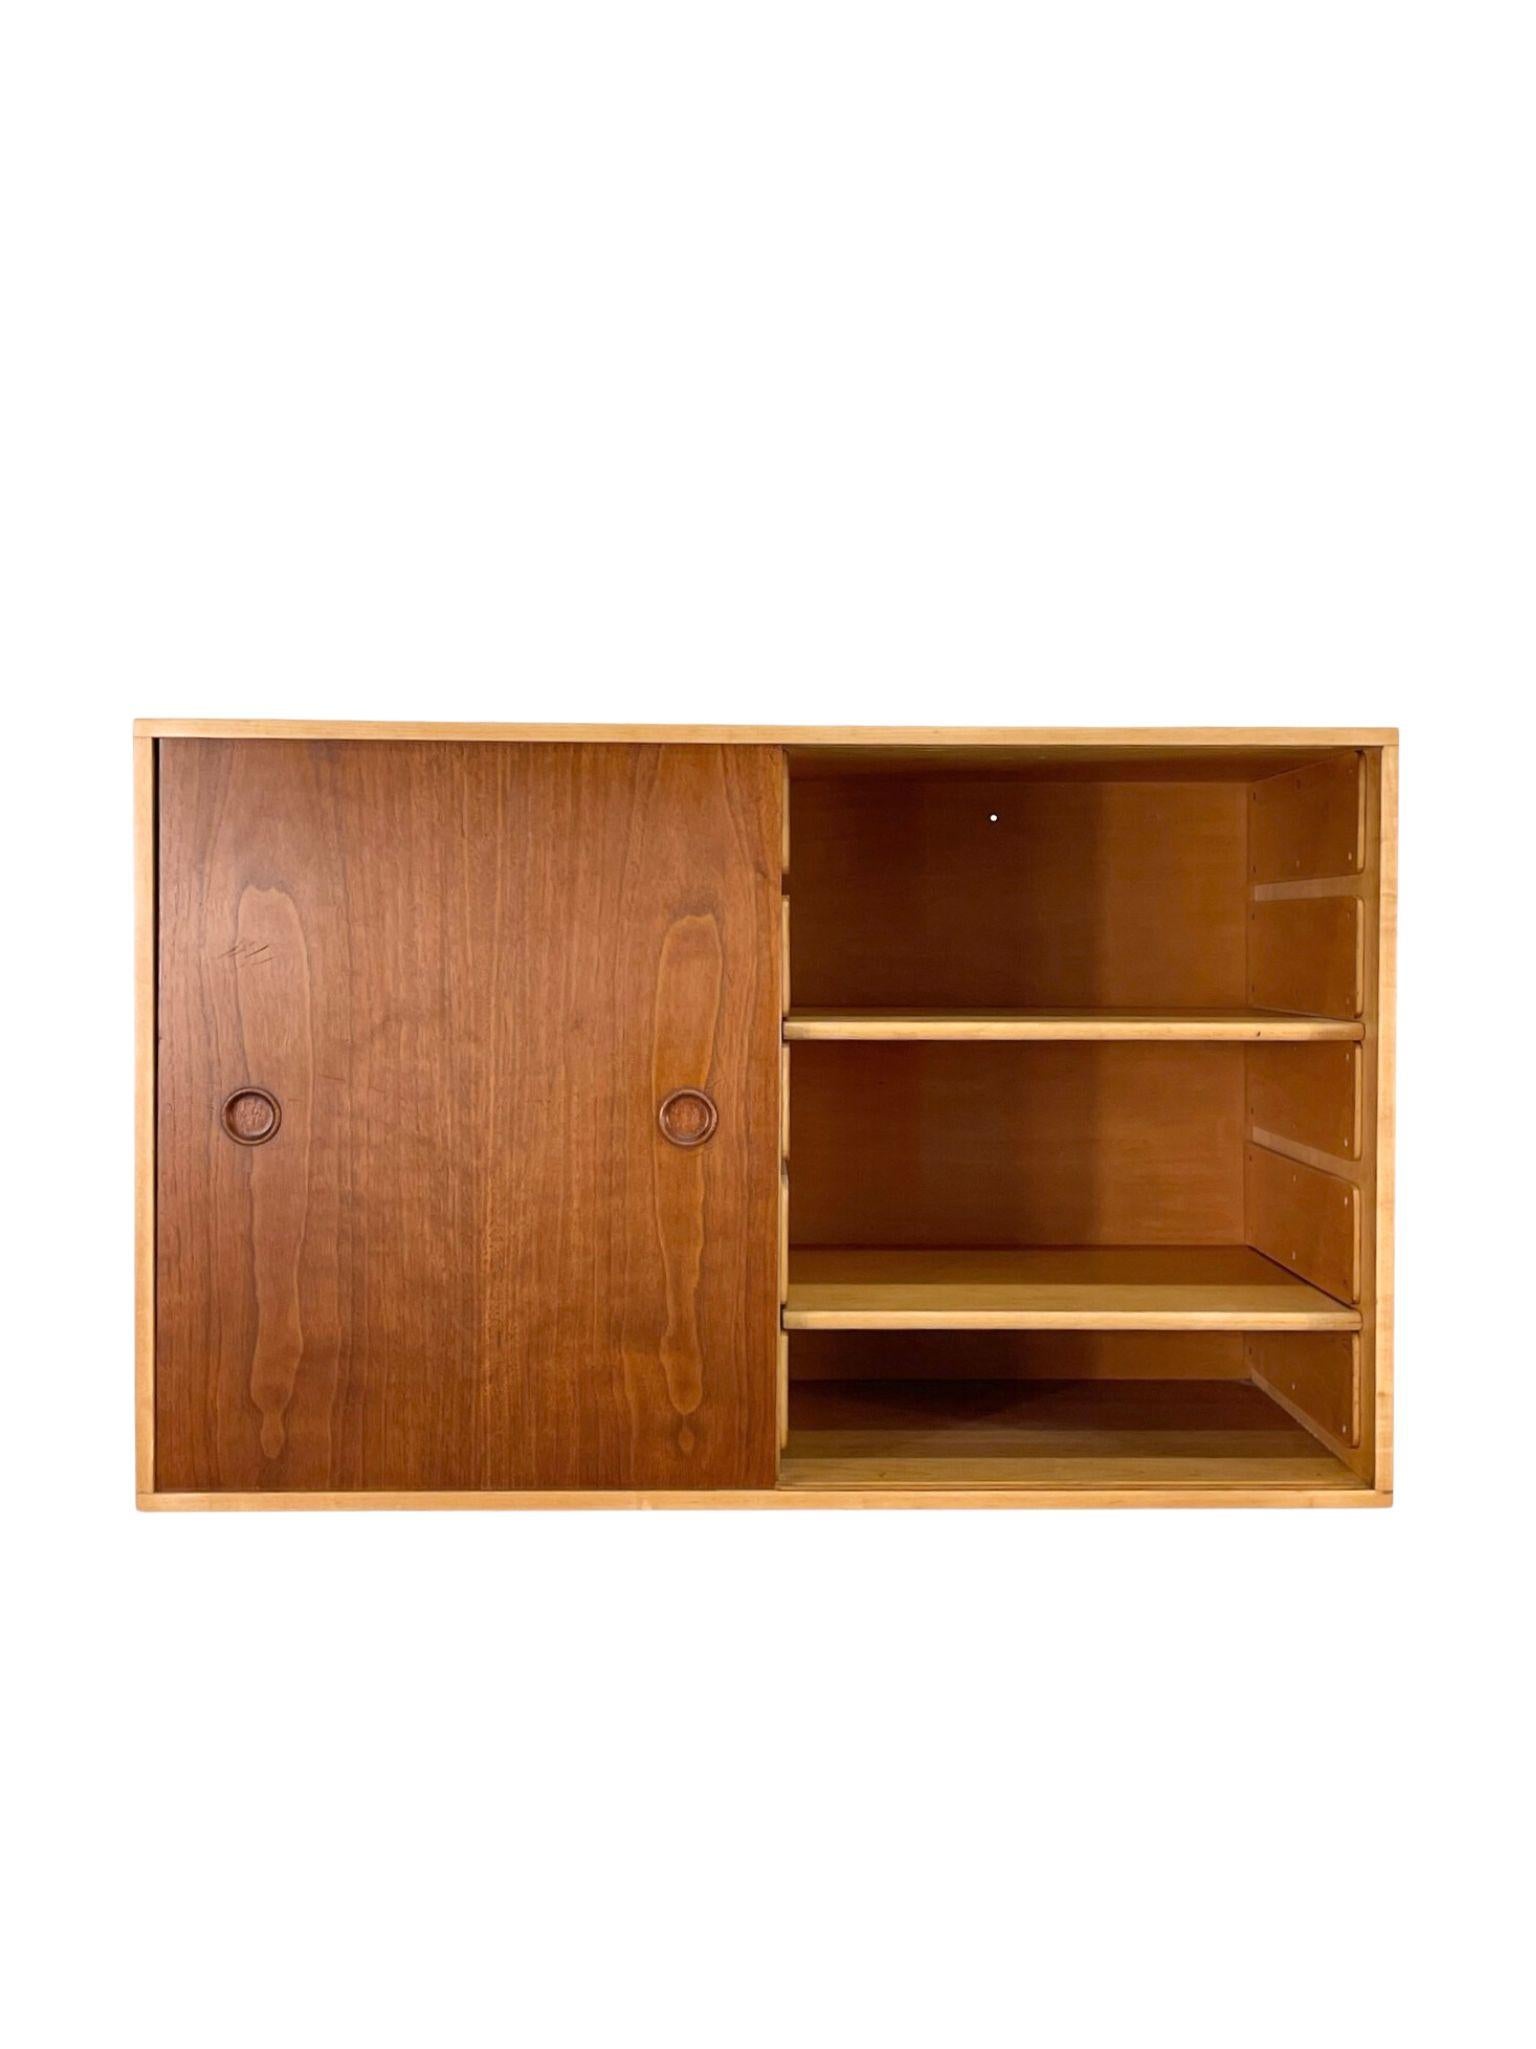 American Wall Mounted Cabinet/Console by Finn Juhl for Baker, Teak and Maple